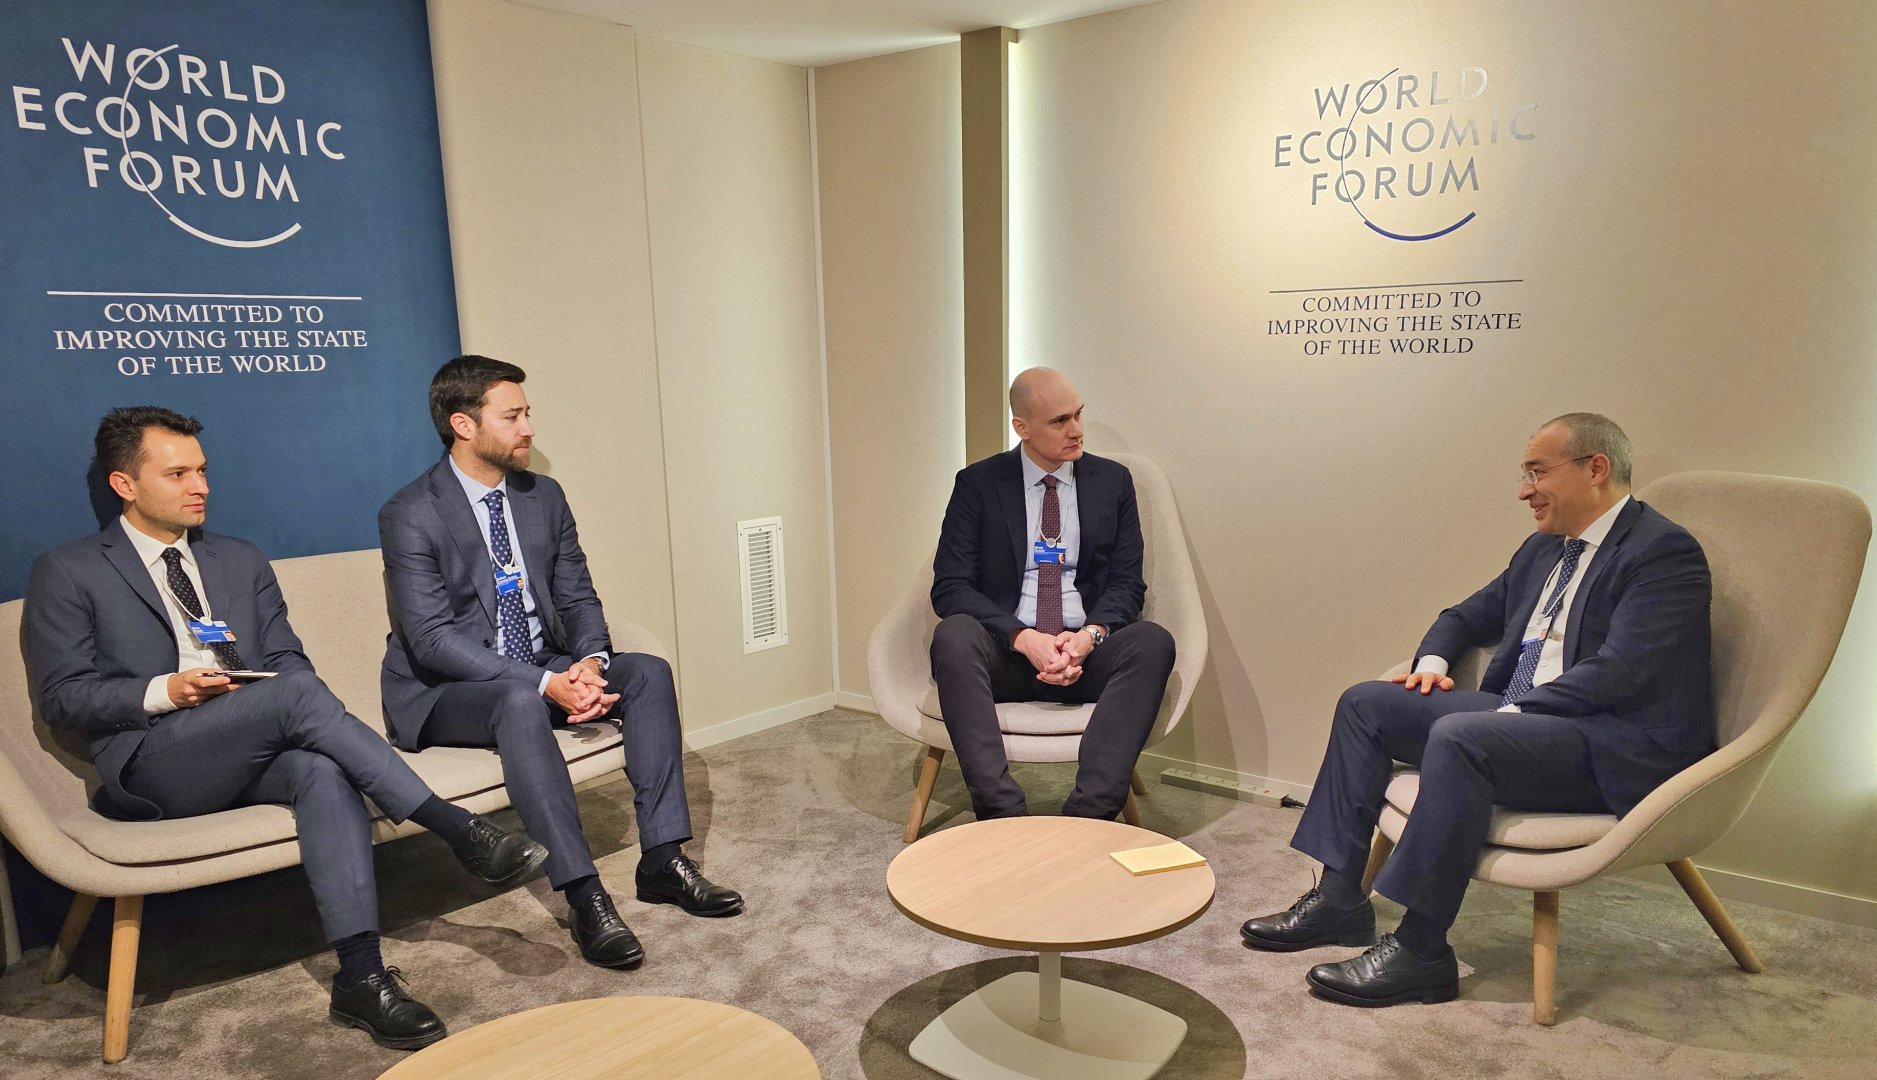 Azerbaijani Minister and WEF Director review green energy policy